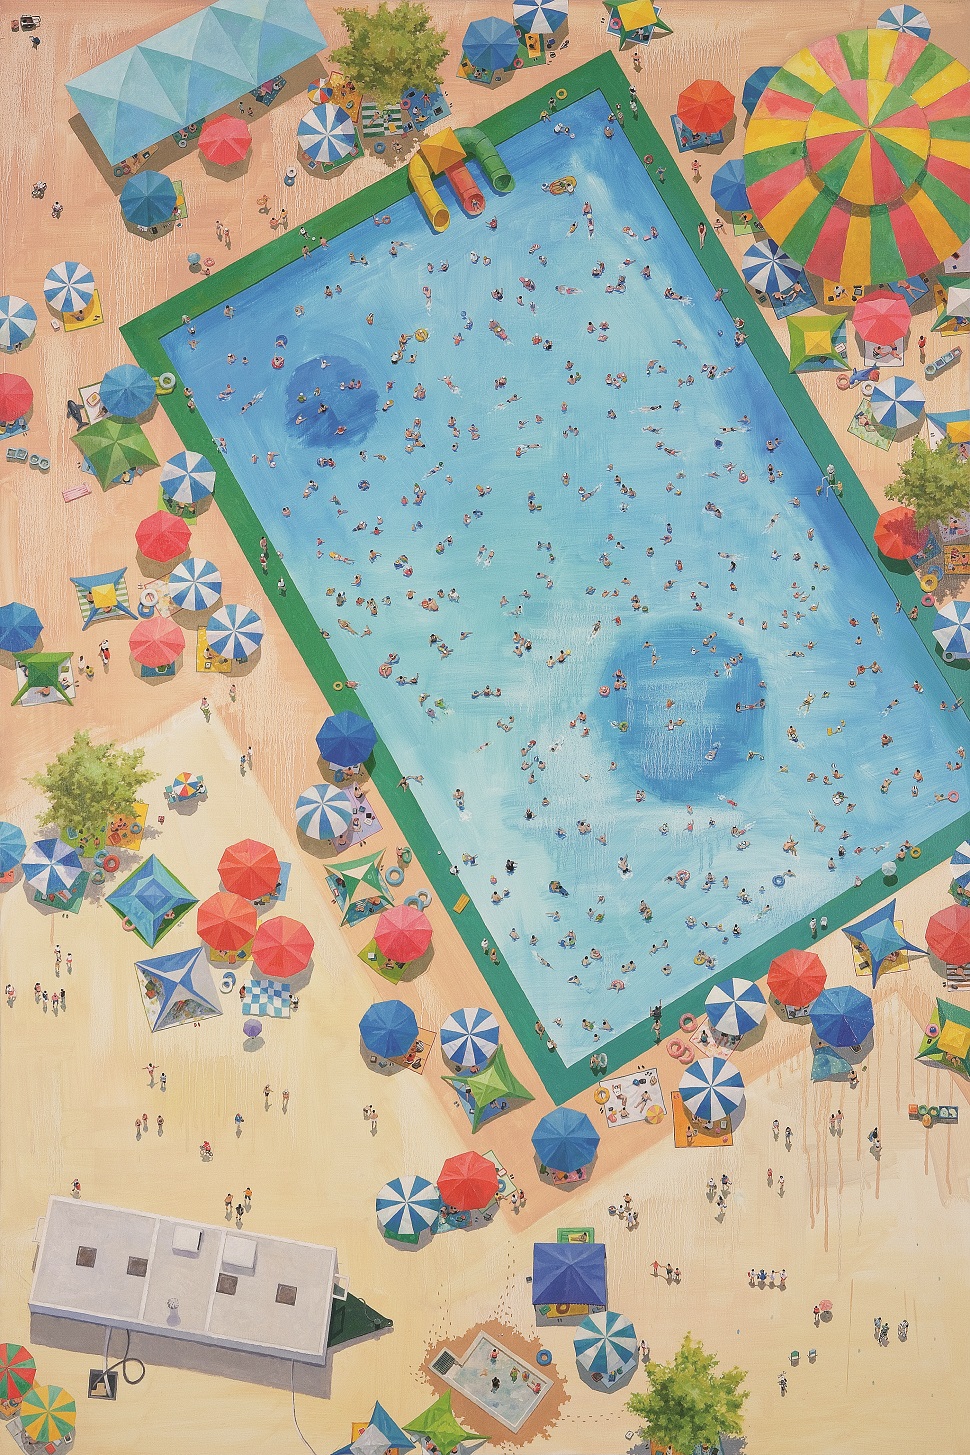 〈Swimming Pool〉, 194x130cm, oil on canvas, 2007